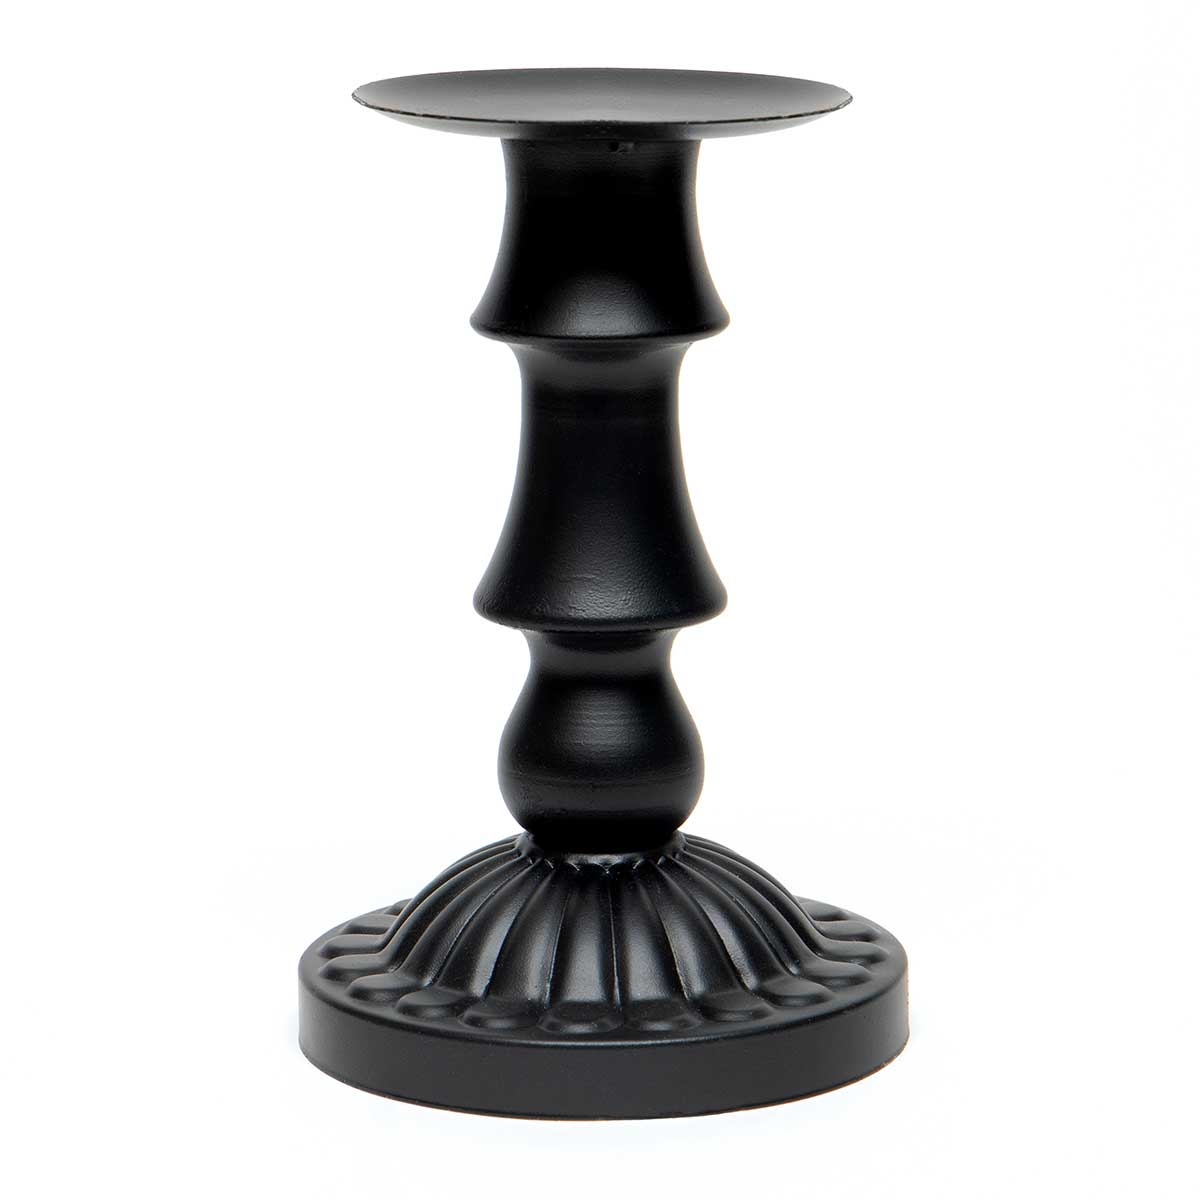 CANDLEHOLDER SMALL 4.5IN X 7.5IN MATTE BLACK METAL